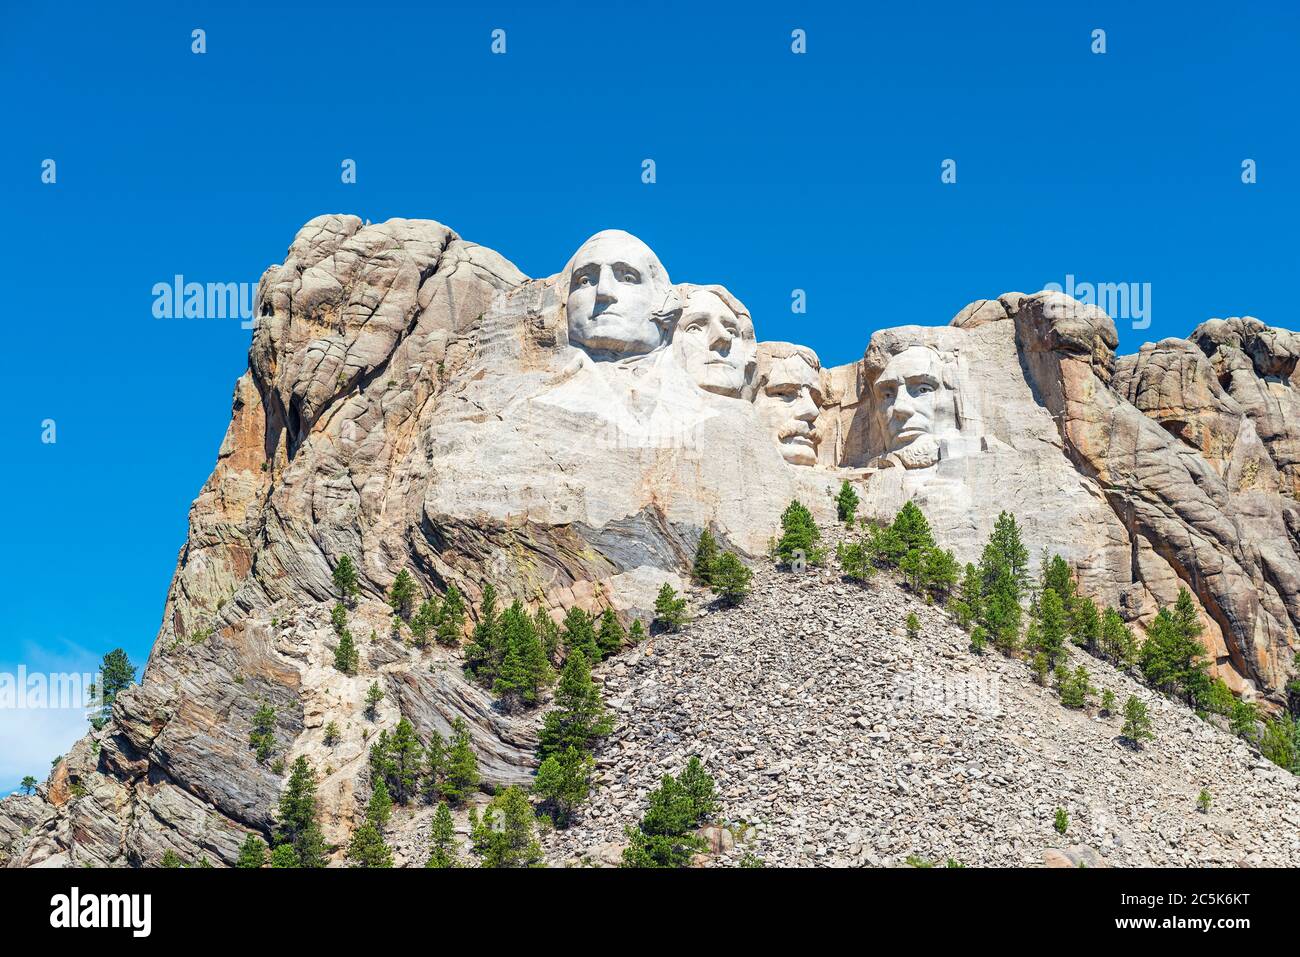 Wide angle view of Mount Rushmore national monument with surrounding forest and nature near Rapid City in South Dakota, United States of America, USA. Stock Photo